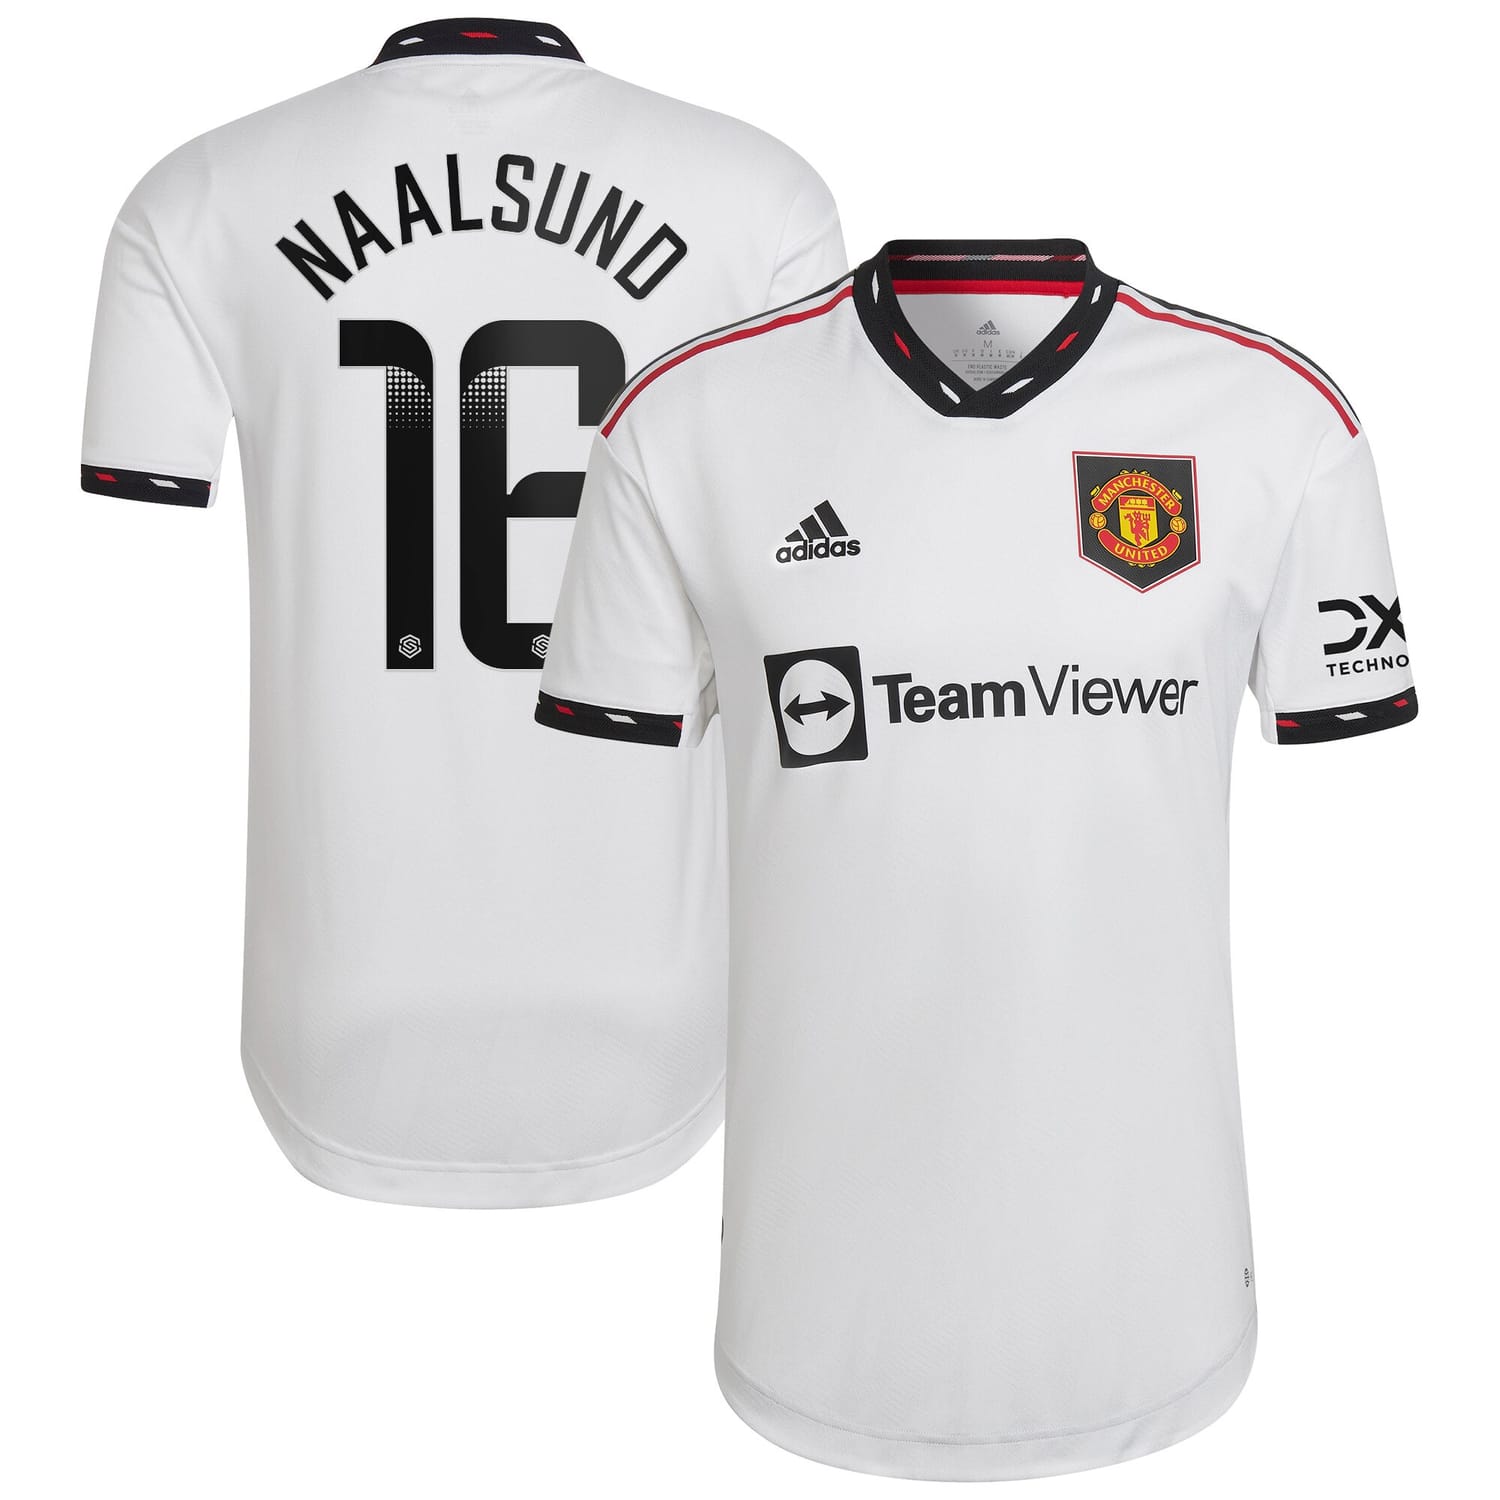 Premier League Manchester United Away WSL Authentic Jersey Shirt 2022-23 player Lisa Naalsund 16 printing for Men